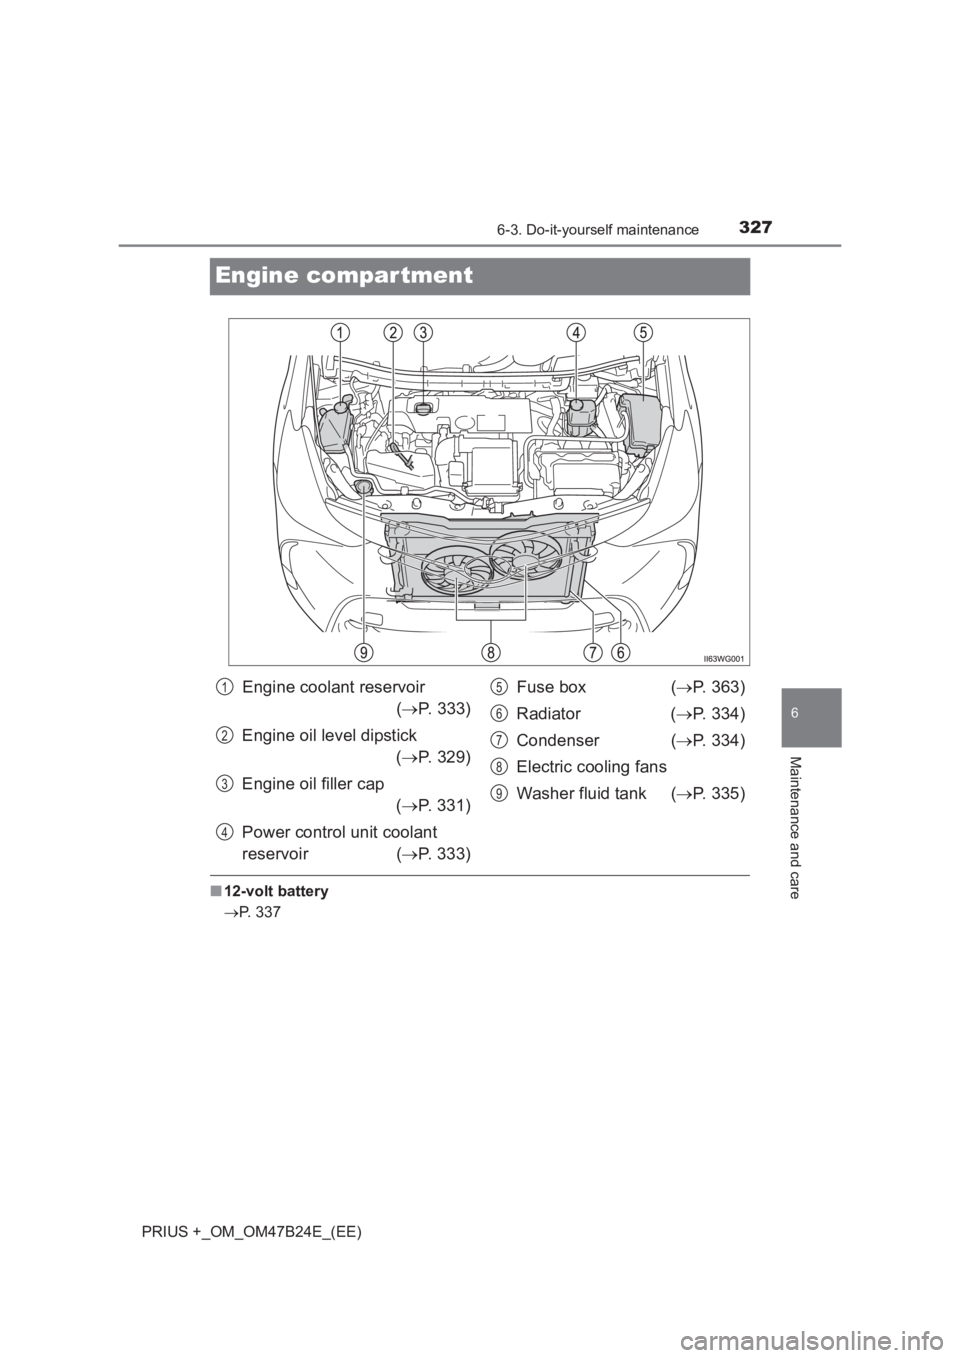 TOYOTA PRIUS PLUS 2017  Owners Manual 3276-3. Do-it-yourself maintenance
PRIUS +_OM_OM47B24E_(EE)
6
Maintenance and care
Engine compar tment
■12-volt battery
→ P. 337
Engine coolant reservoir
(→ P. 333)
Engine oil level dipstick (�